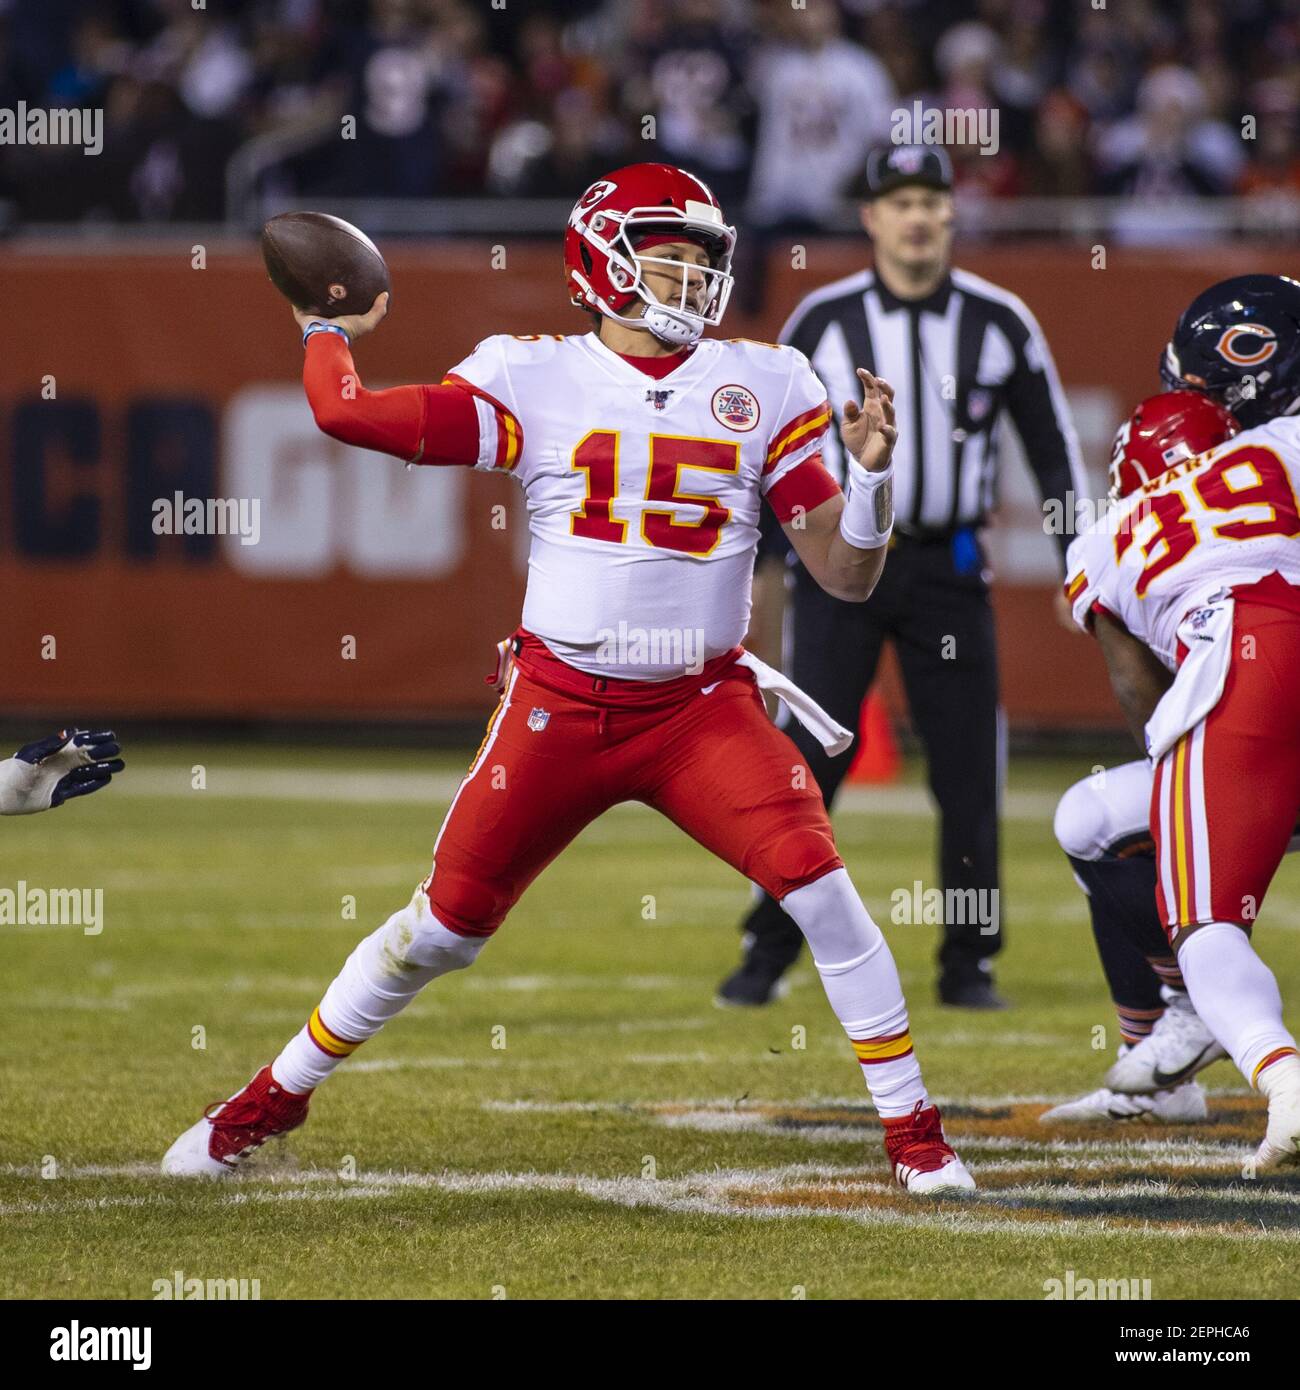 December 22, 2019: Chicago, Illinois, U.S. - Chiefs #15 Patrick Mahomes in  action during the NFL Game between the Kansas City Chiefs and Chicago Bears  at Soldier Field in Chicago, IL. Photographer: